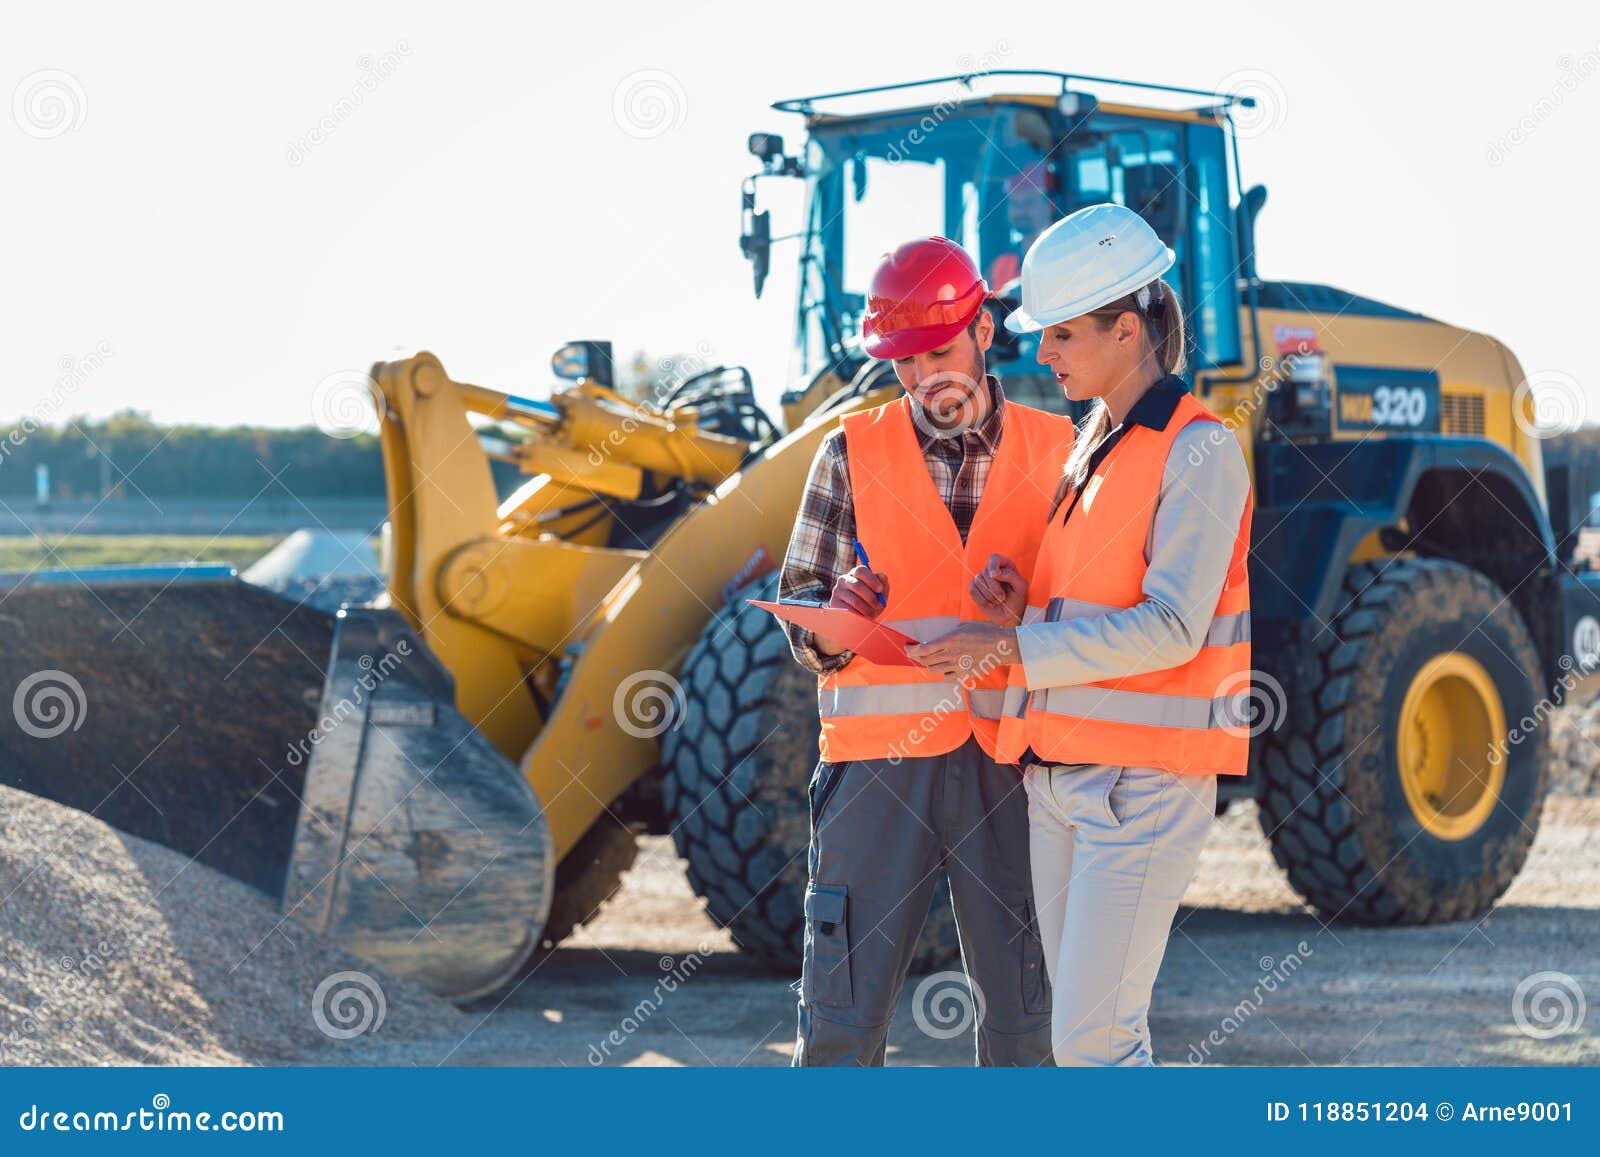 man and woman worker on construction site